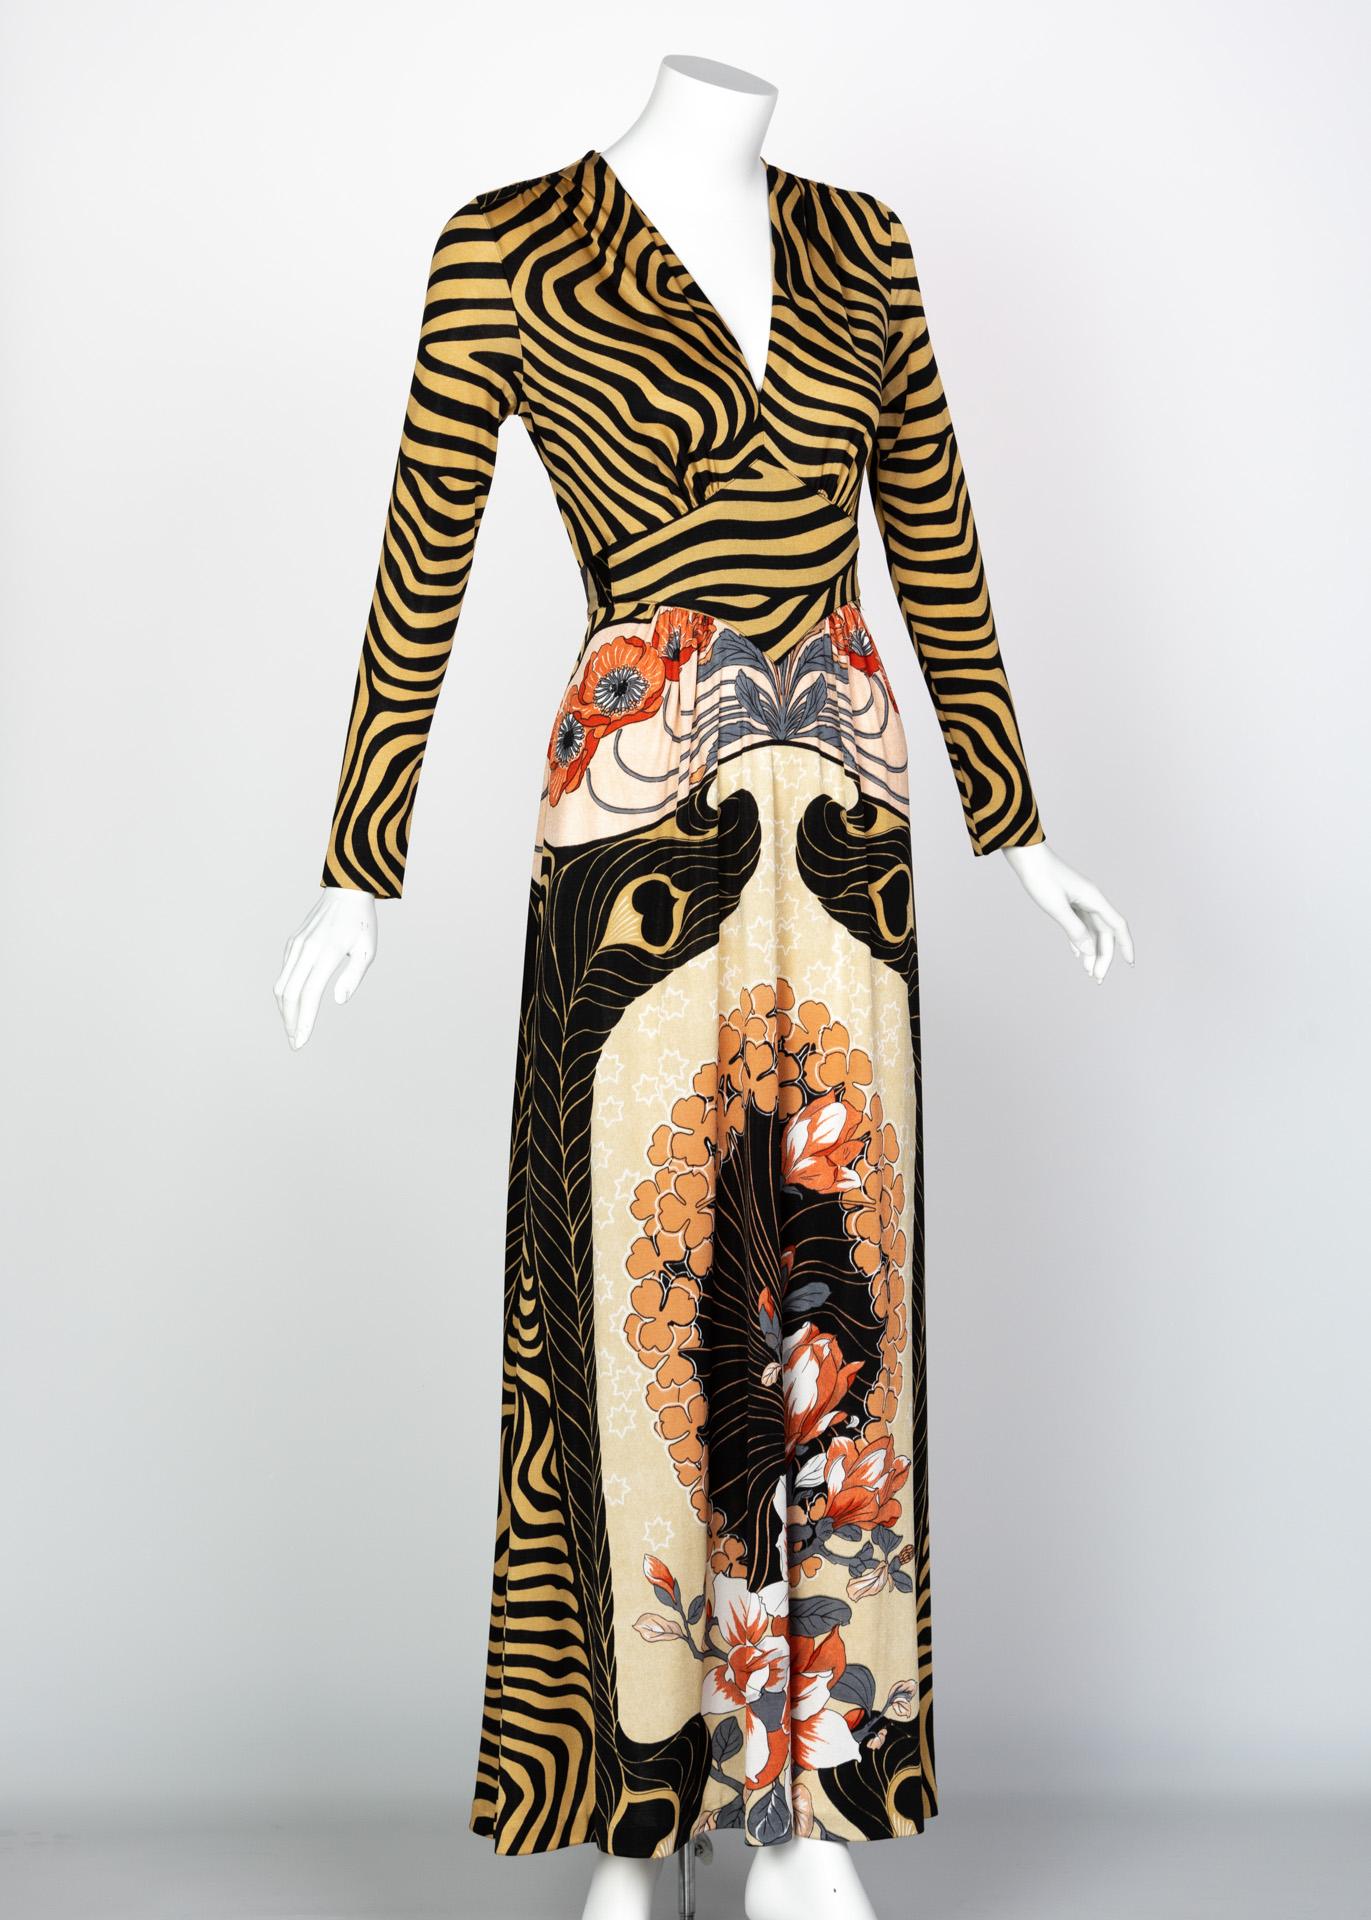 In collaboration with the renowned Paris house of prints, Leonard, the graphic and print designer MacTac offered this zany almost surrealist print for this 1970s silky nylon  jersey maxi dress. This dress combines a buff and black zebra stripe motif